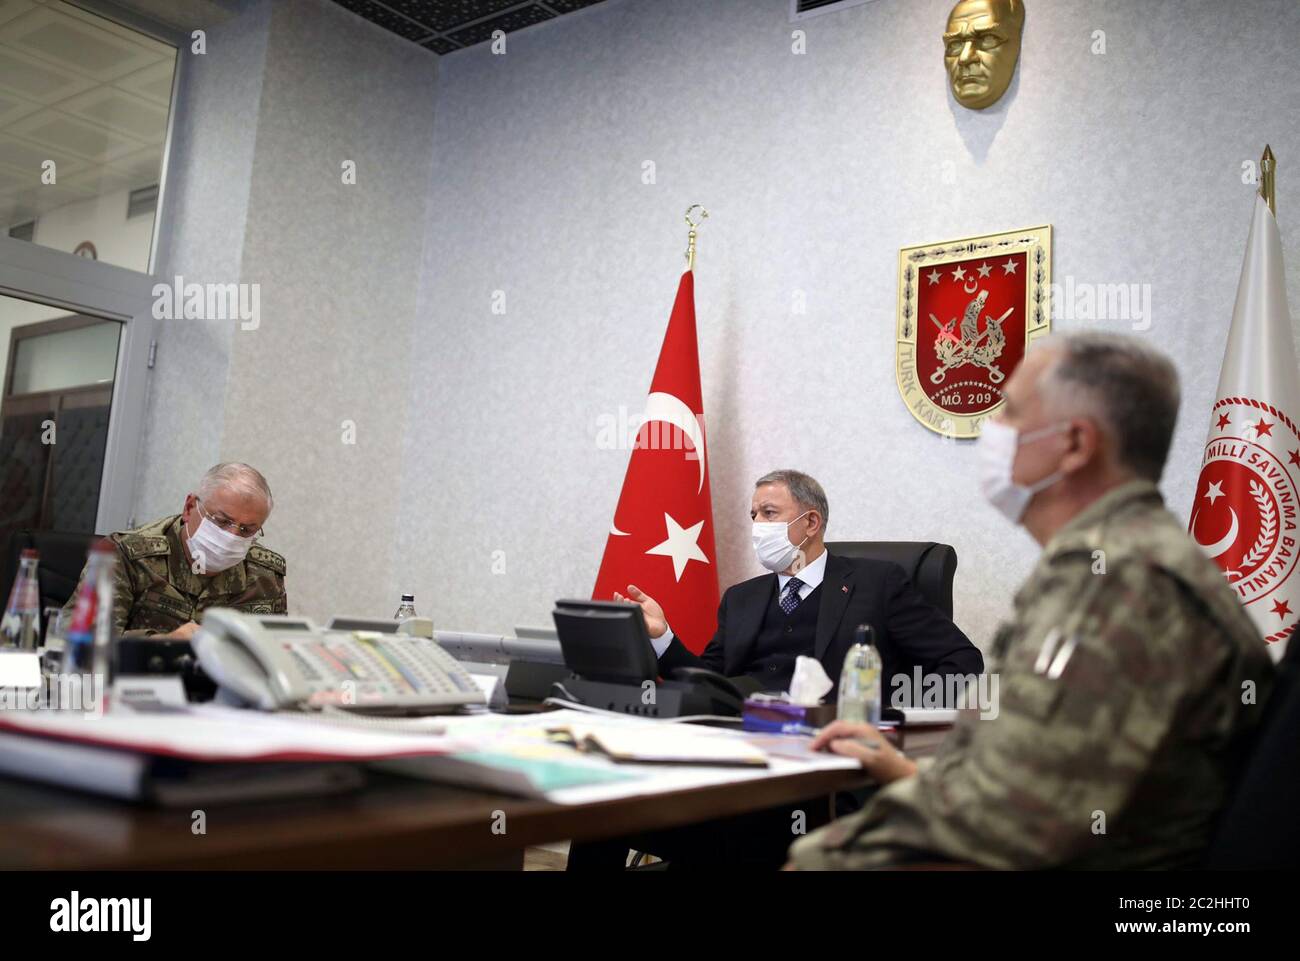 Ankara. 17th June, 2020. Turkish Defense Minister Hulusi Akar (C) attends a meeting with other commanders at the Army Command Control Center in Ankara, Turkey, on June 17, 2020. Turkey has launched Operation Claw-Tiger in northern Iraq with its commando forces supported by air elements, Turkish Defense Ministry announced on Wednesday. Credit: Xinhua/Alamy Live News Stock Photo